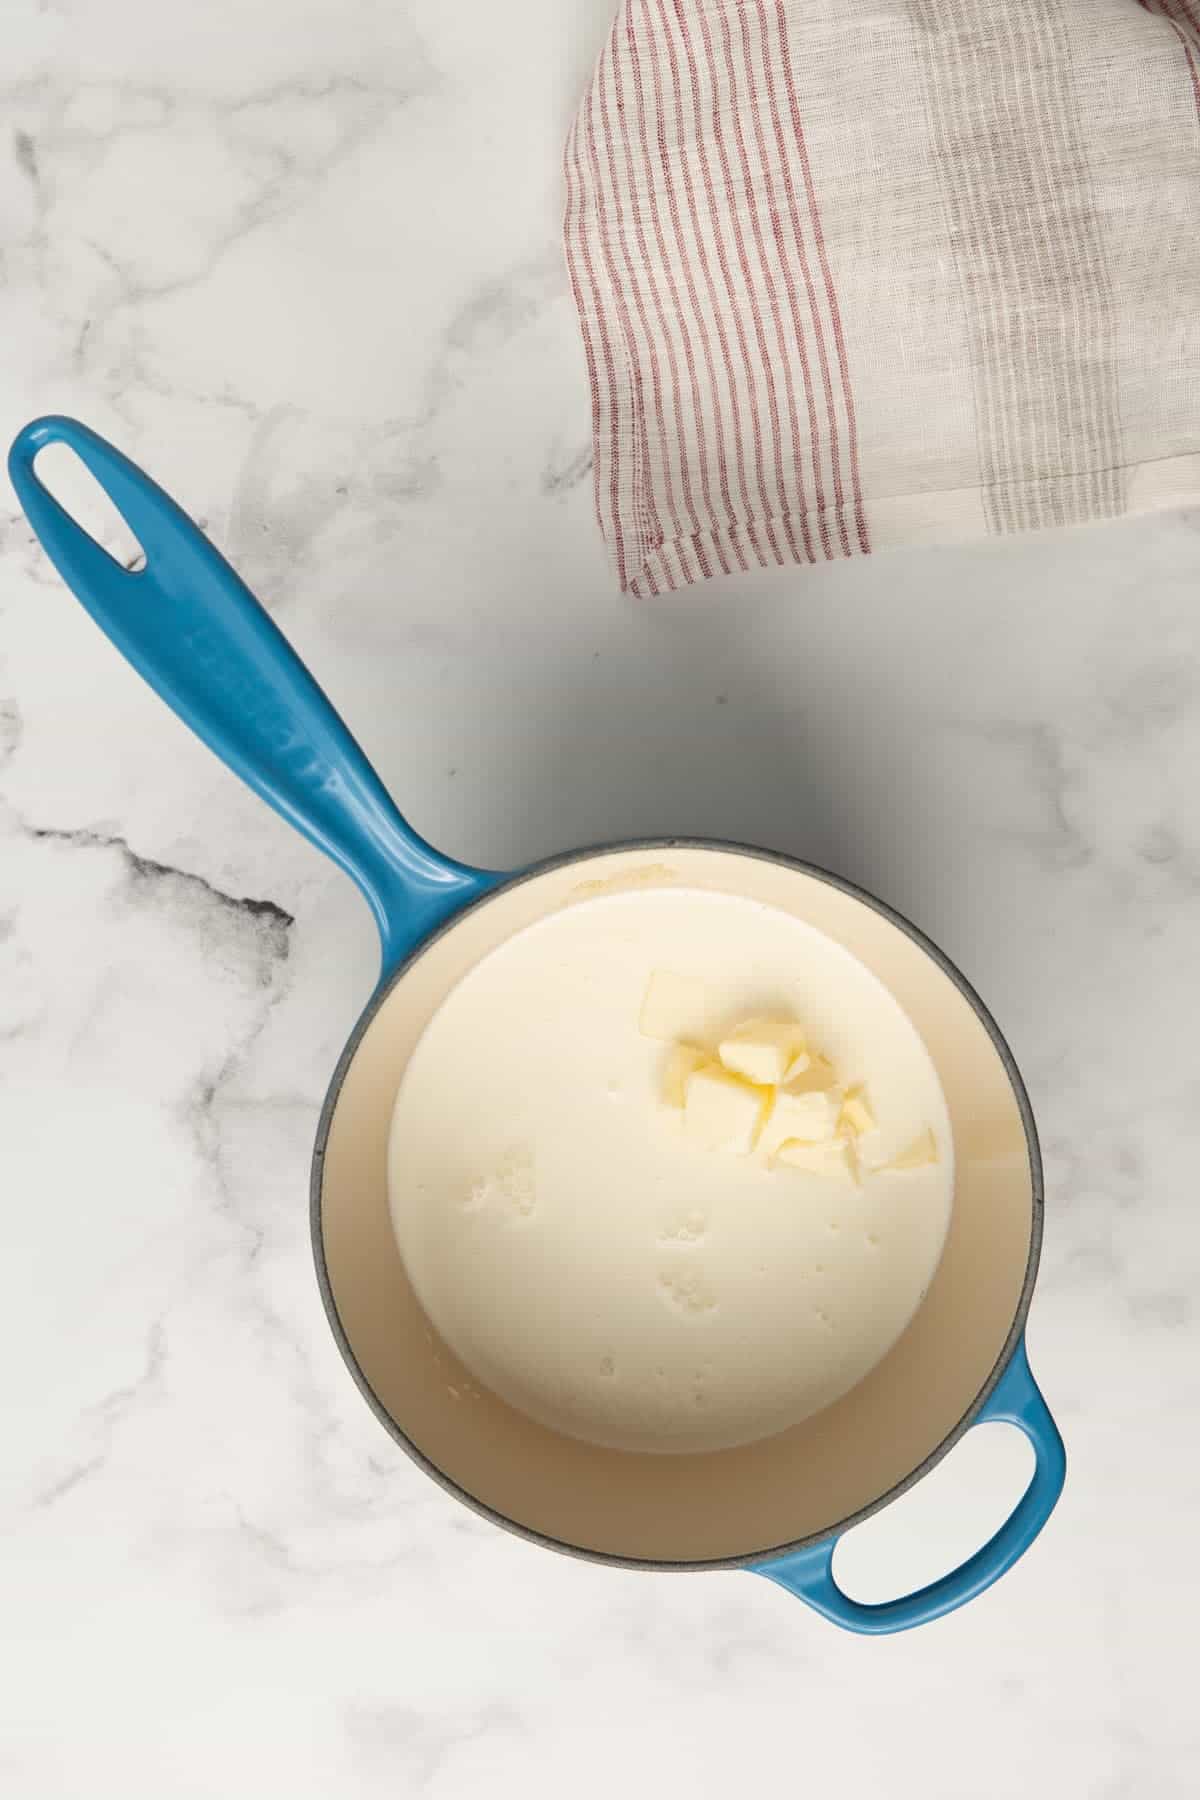 A blue Le Creuset saucepan containing heavy cream, butter, and chicken broth.